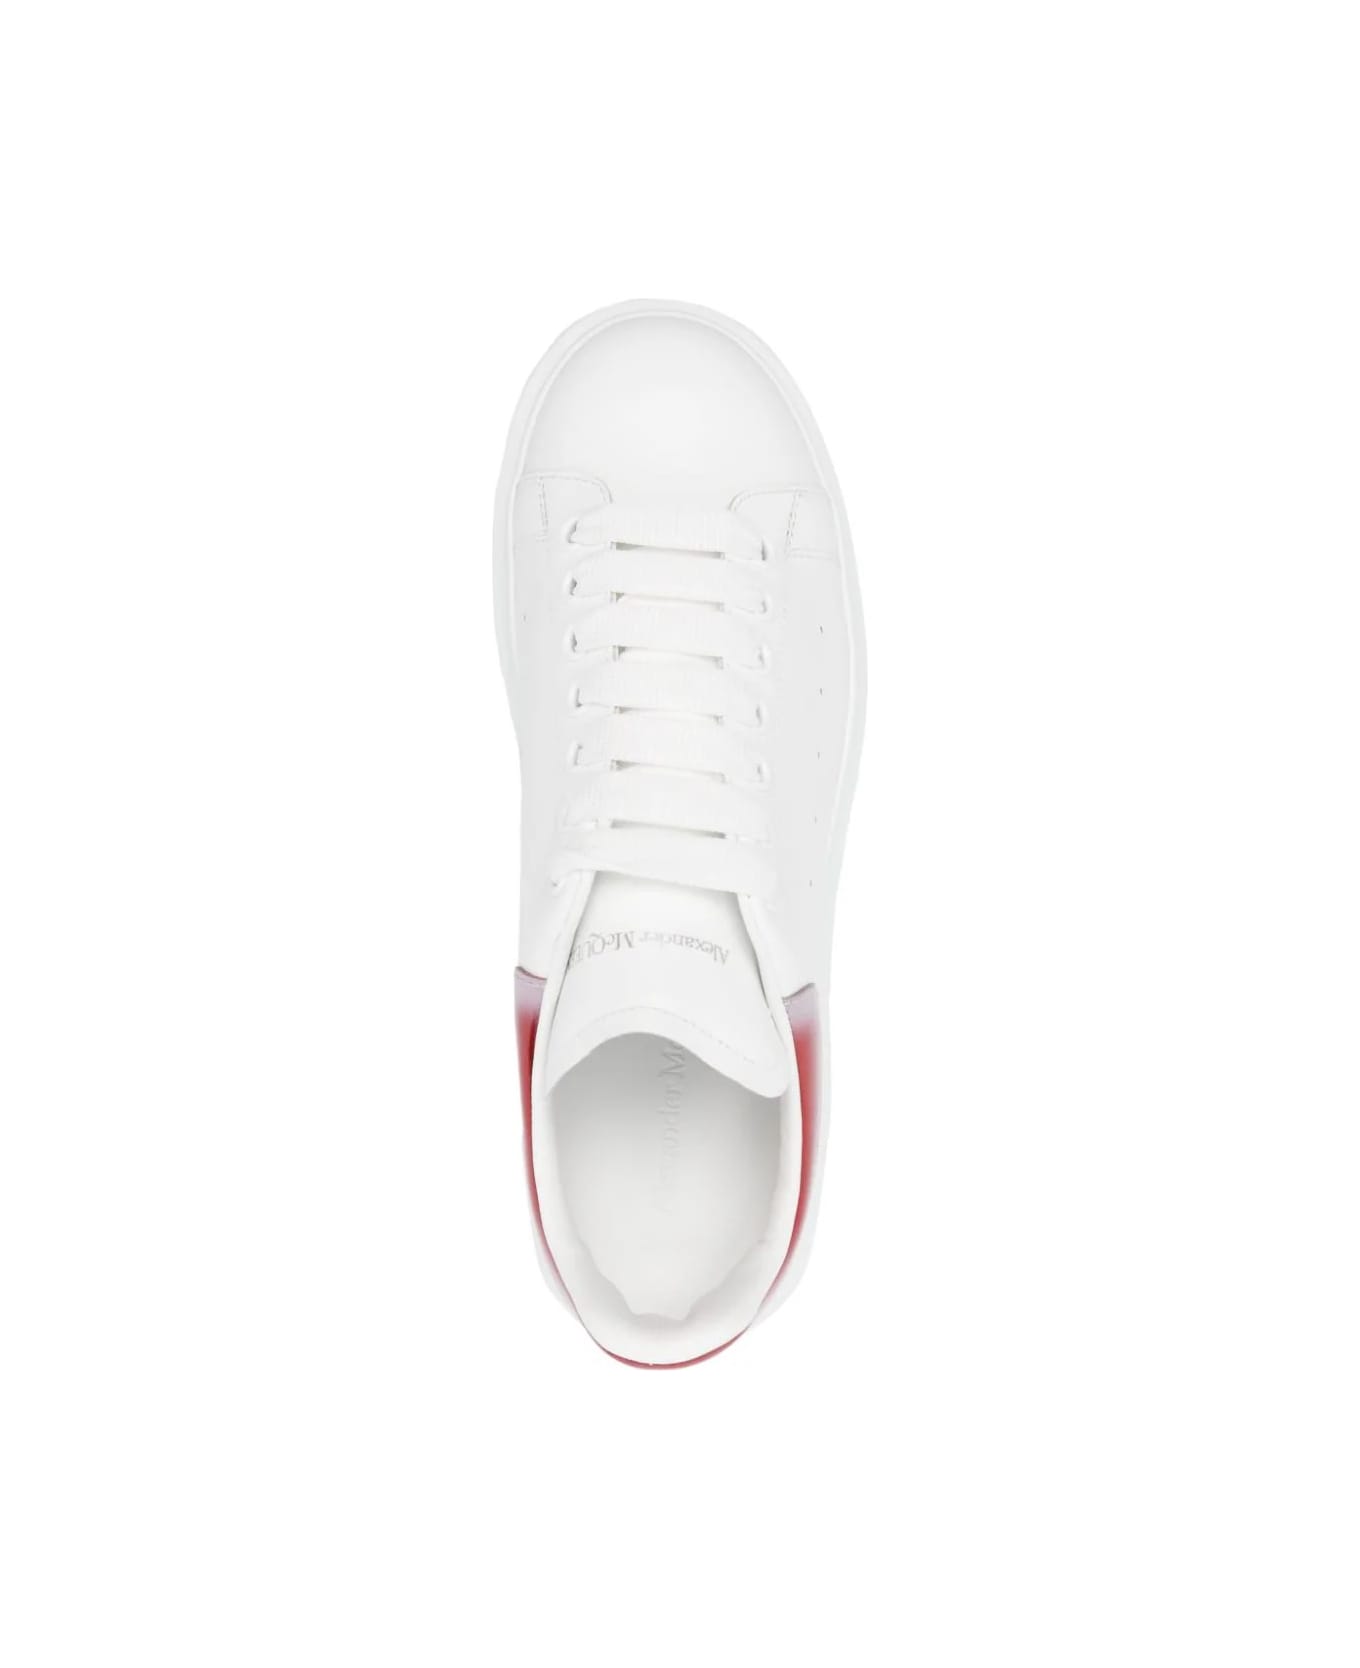 Alexander McQueen Oversized Sneakers In White And Red - White